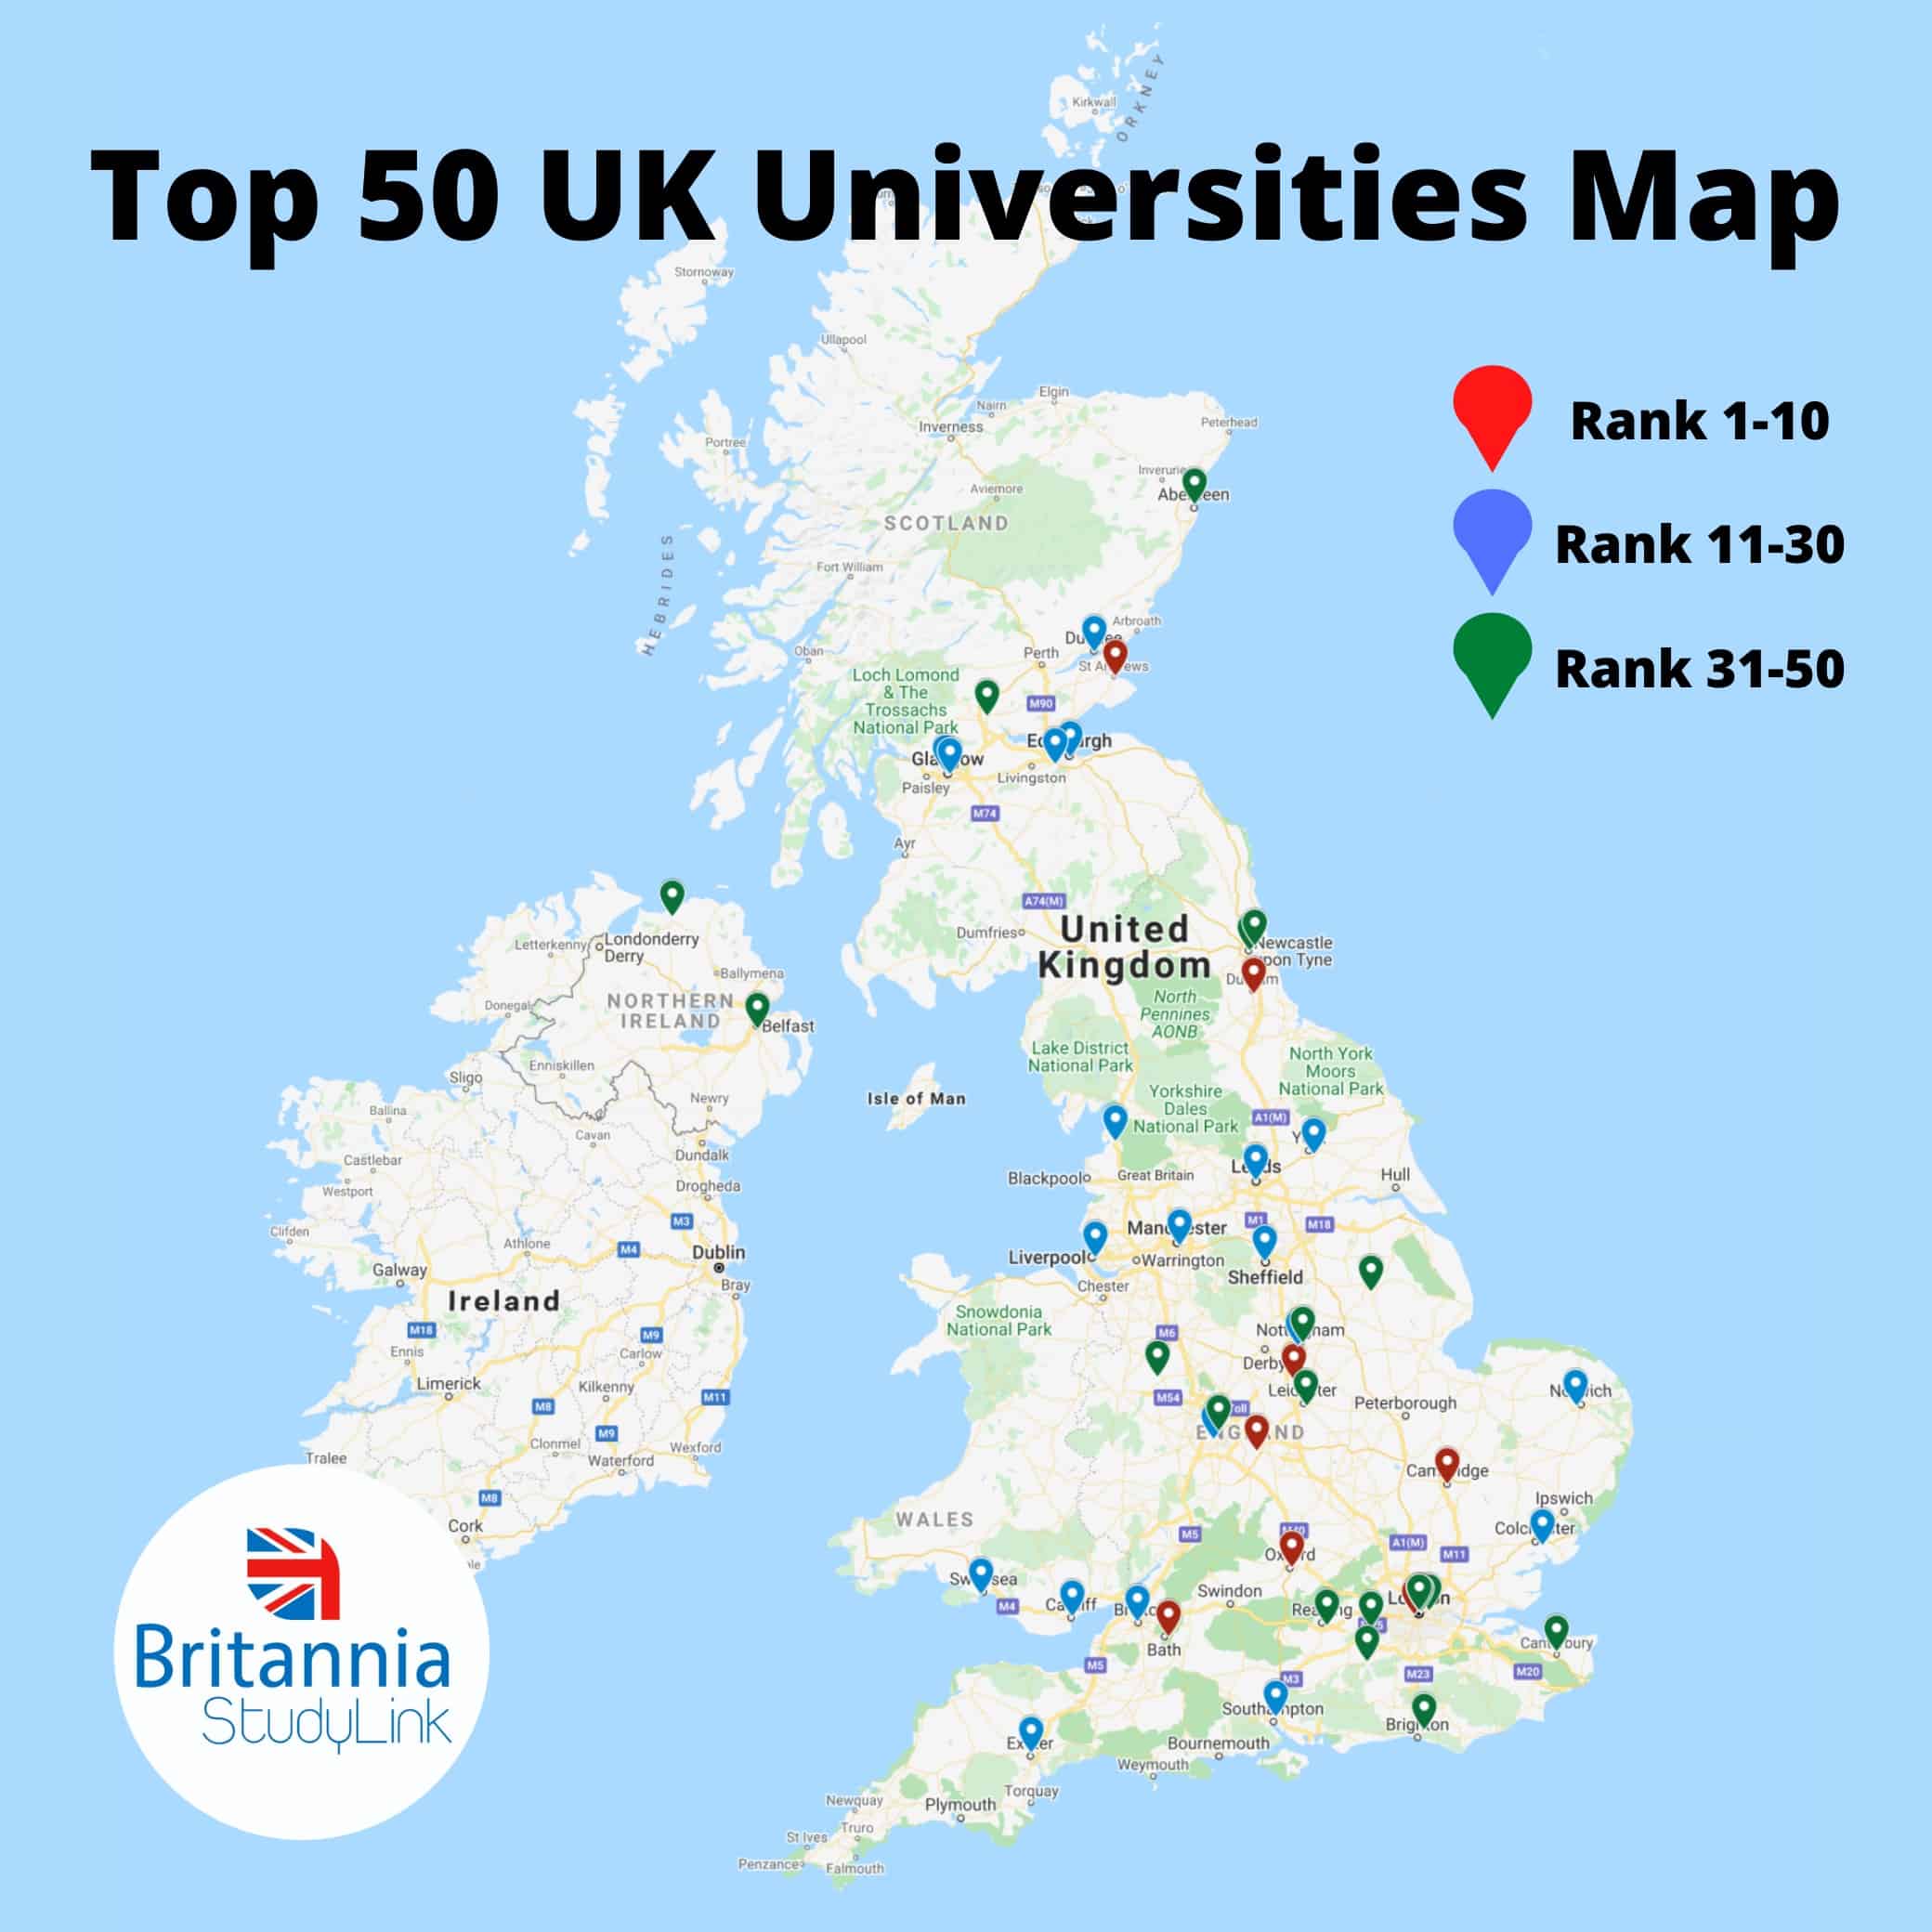 Top Universities Map - and League Table